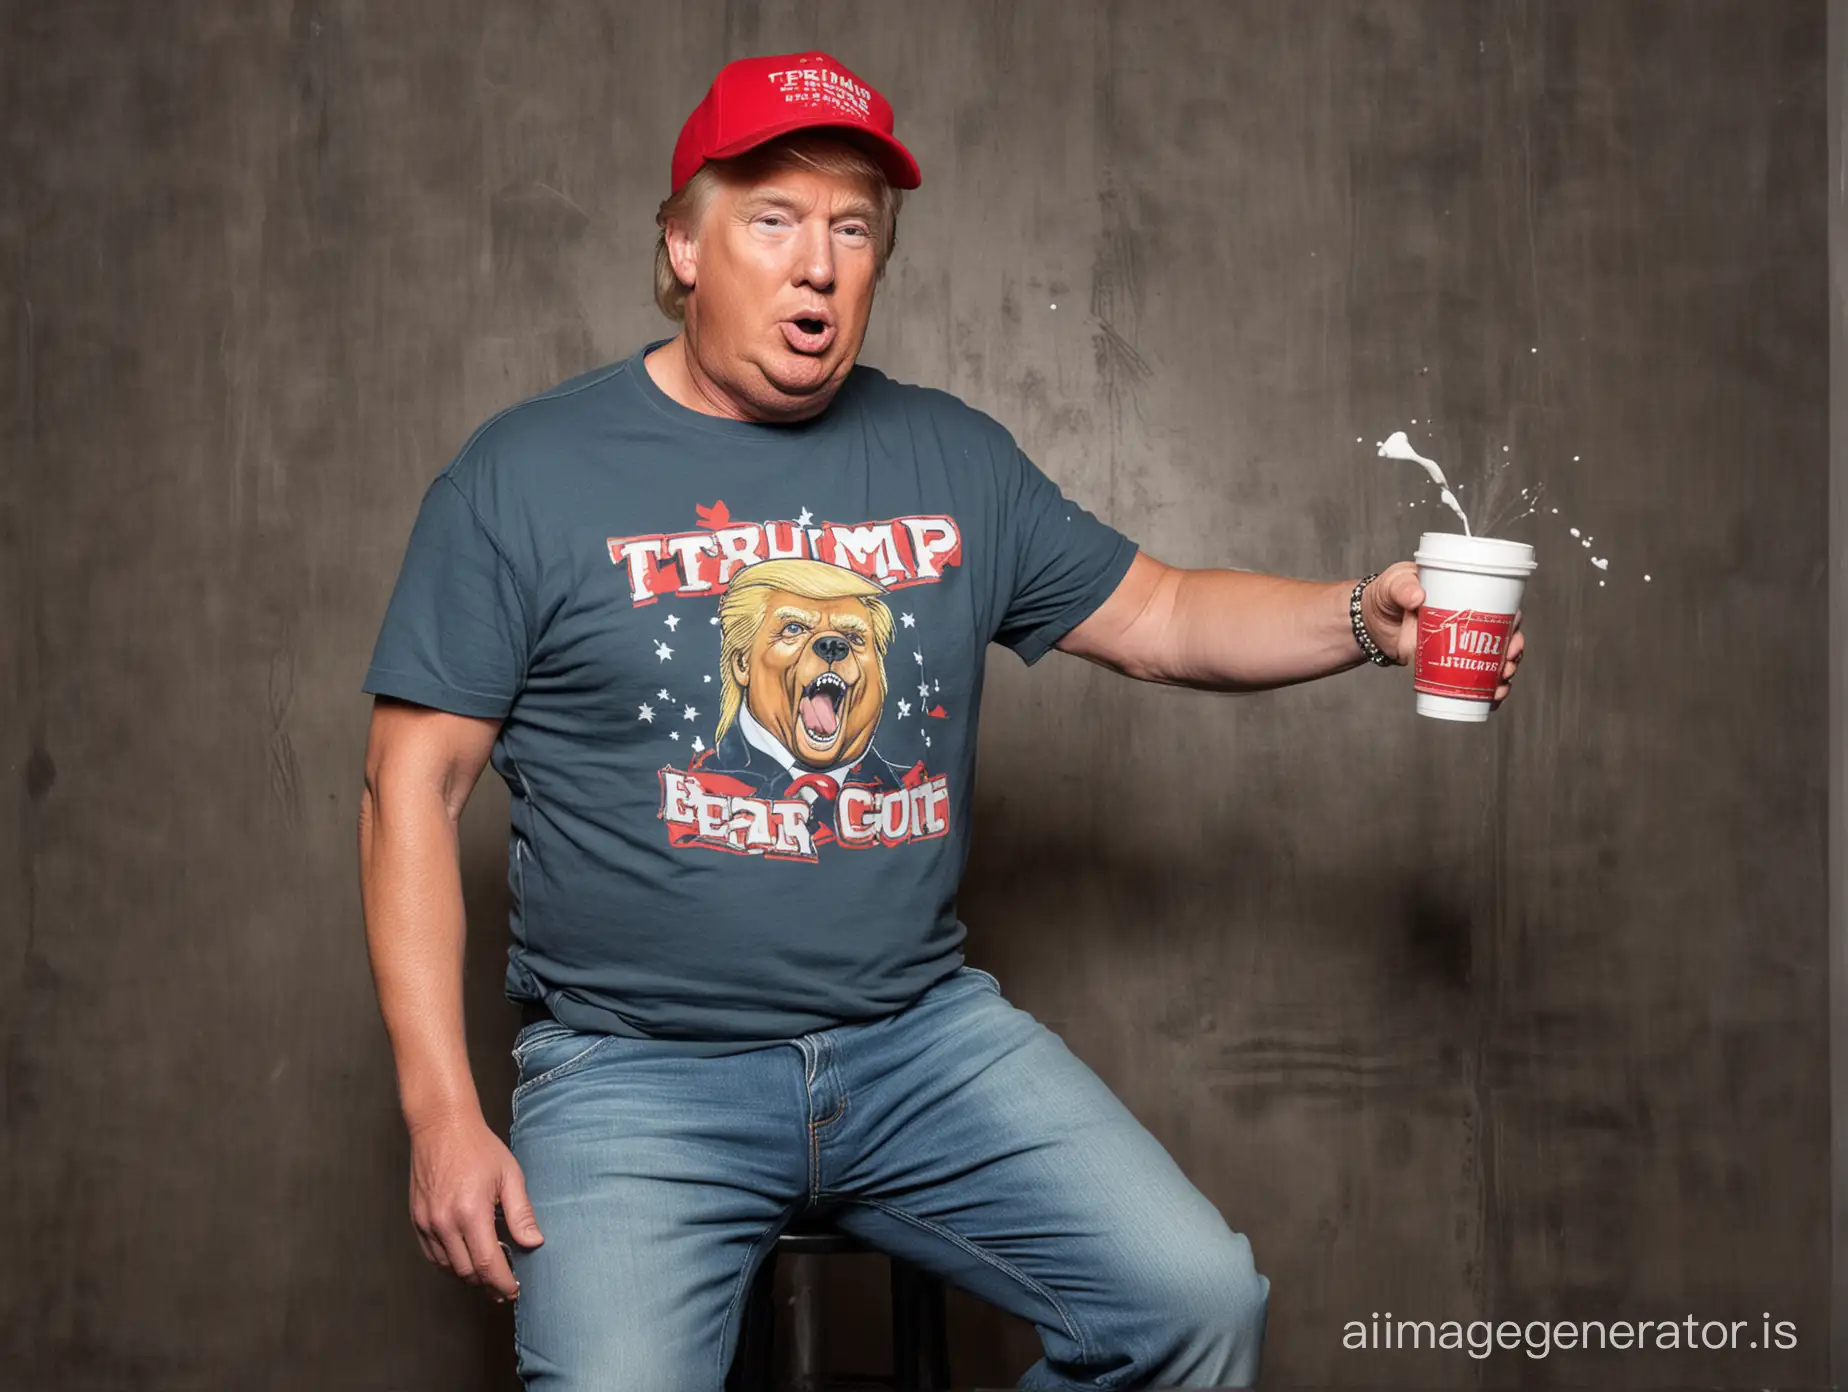 Donald Trump in Techno Club in T-Shirt and Jeans spit a cup of bear out